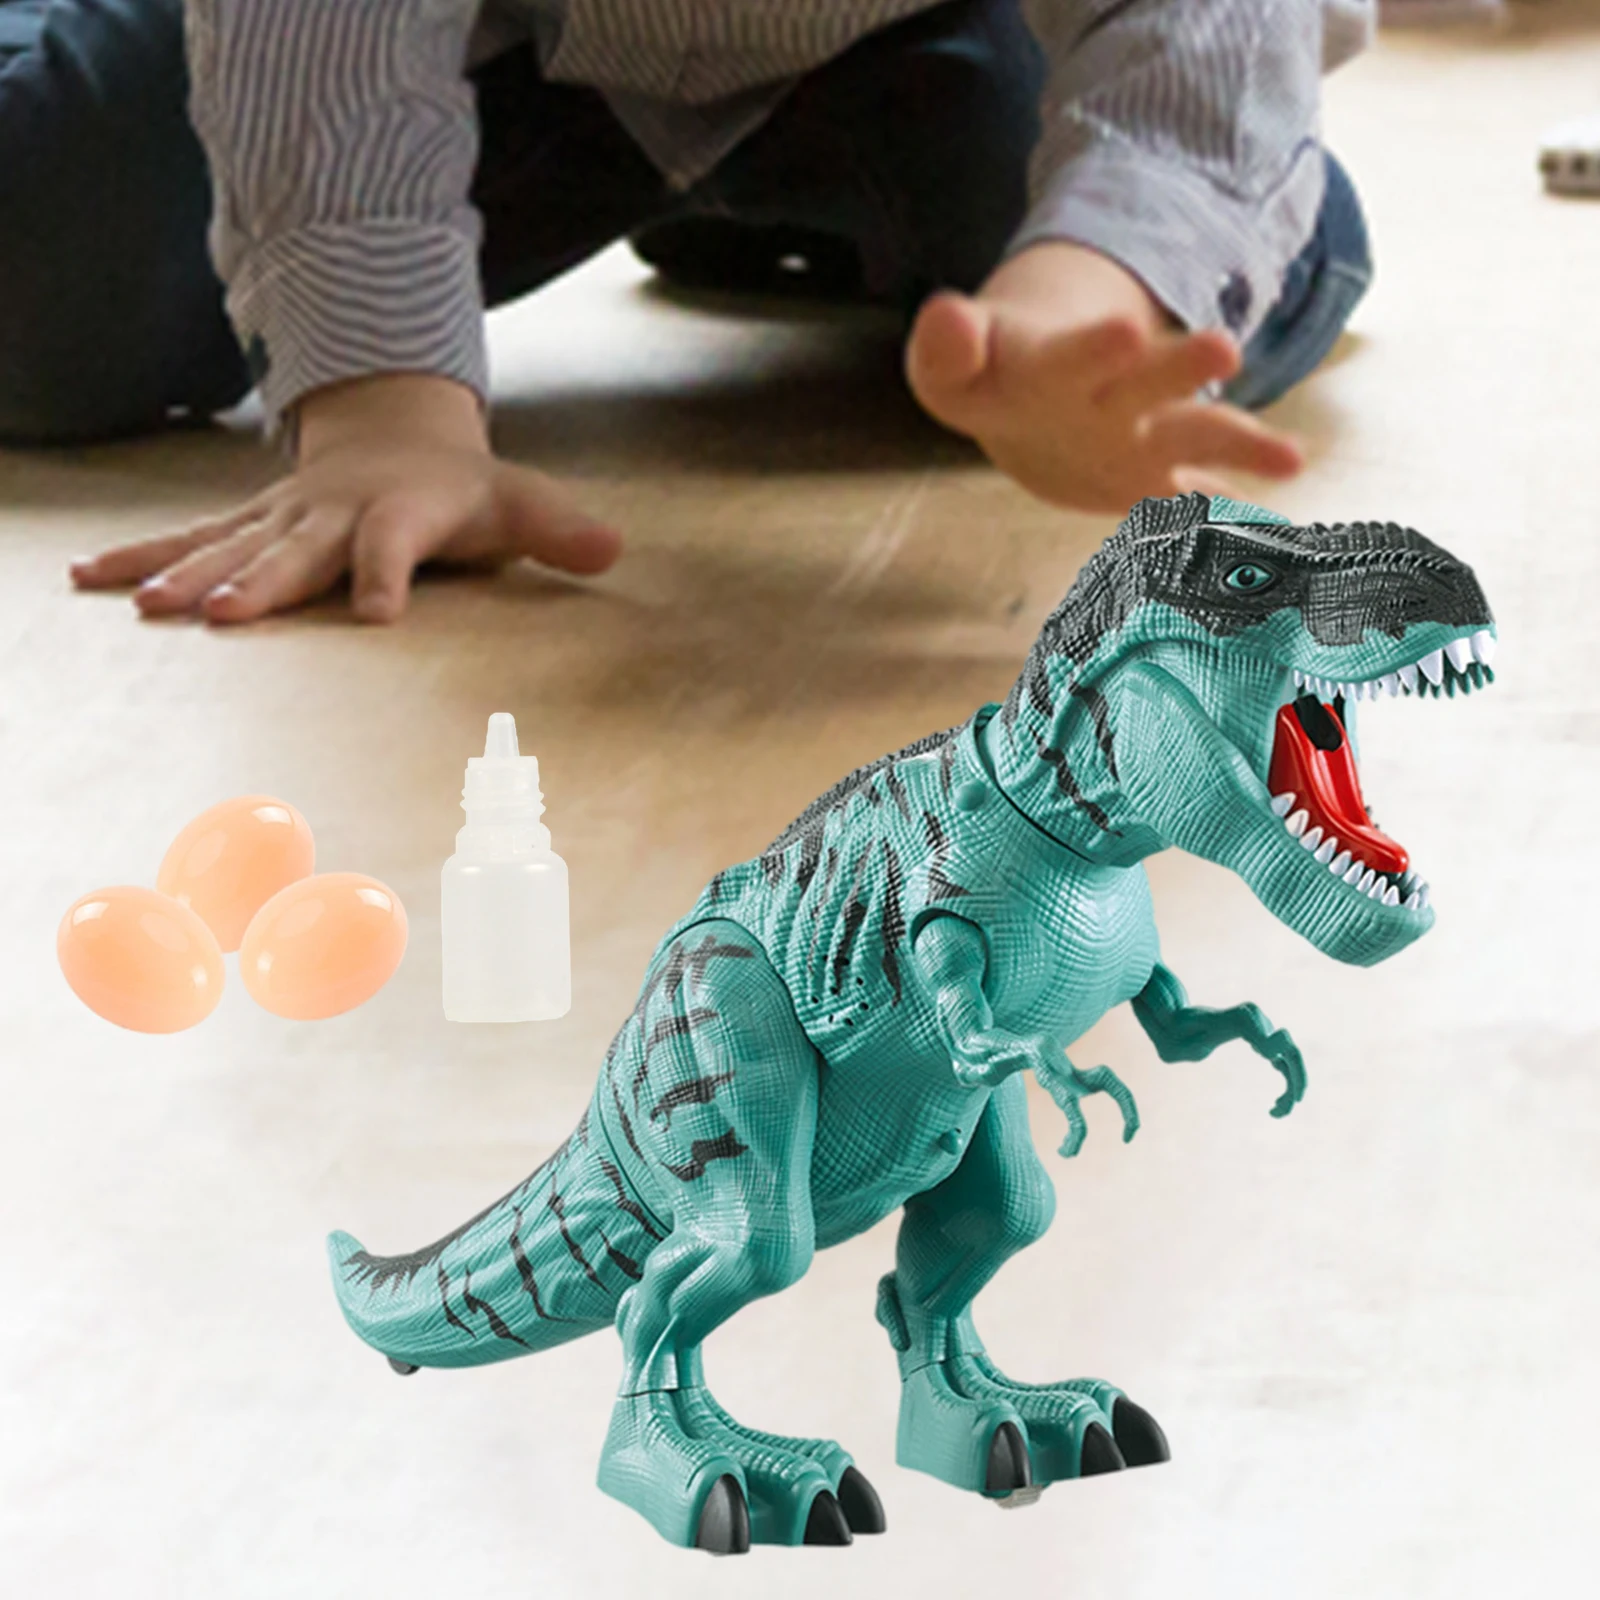 Electronic Walking Dinosaur with Roaring Sounds Walking Robot Dinosaur Simulation Dinosaur Toys for Boys Kids Girls Ages 3+